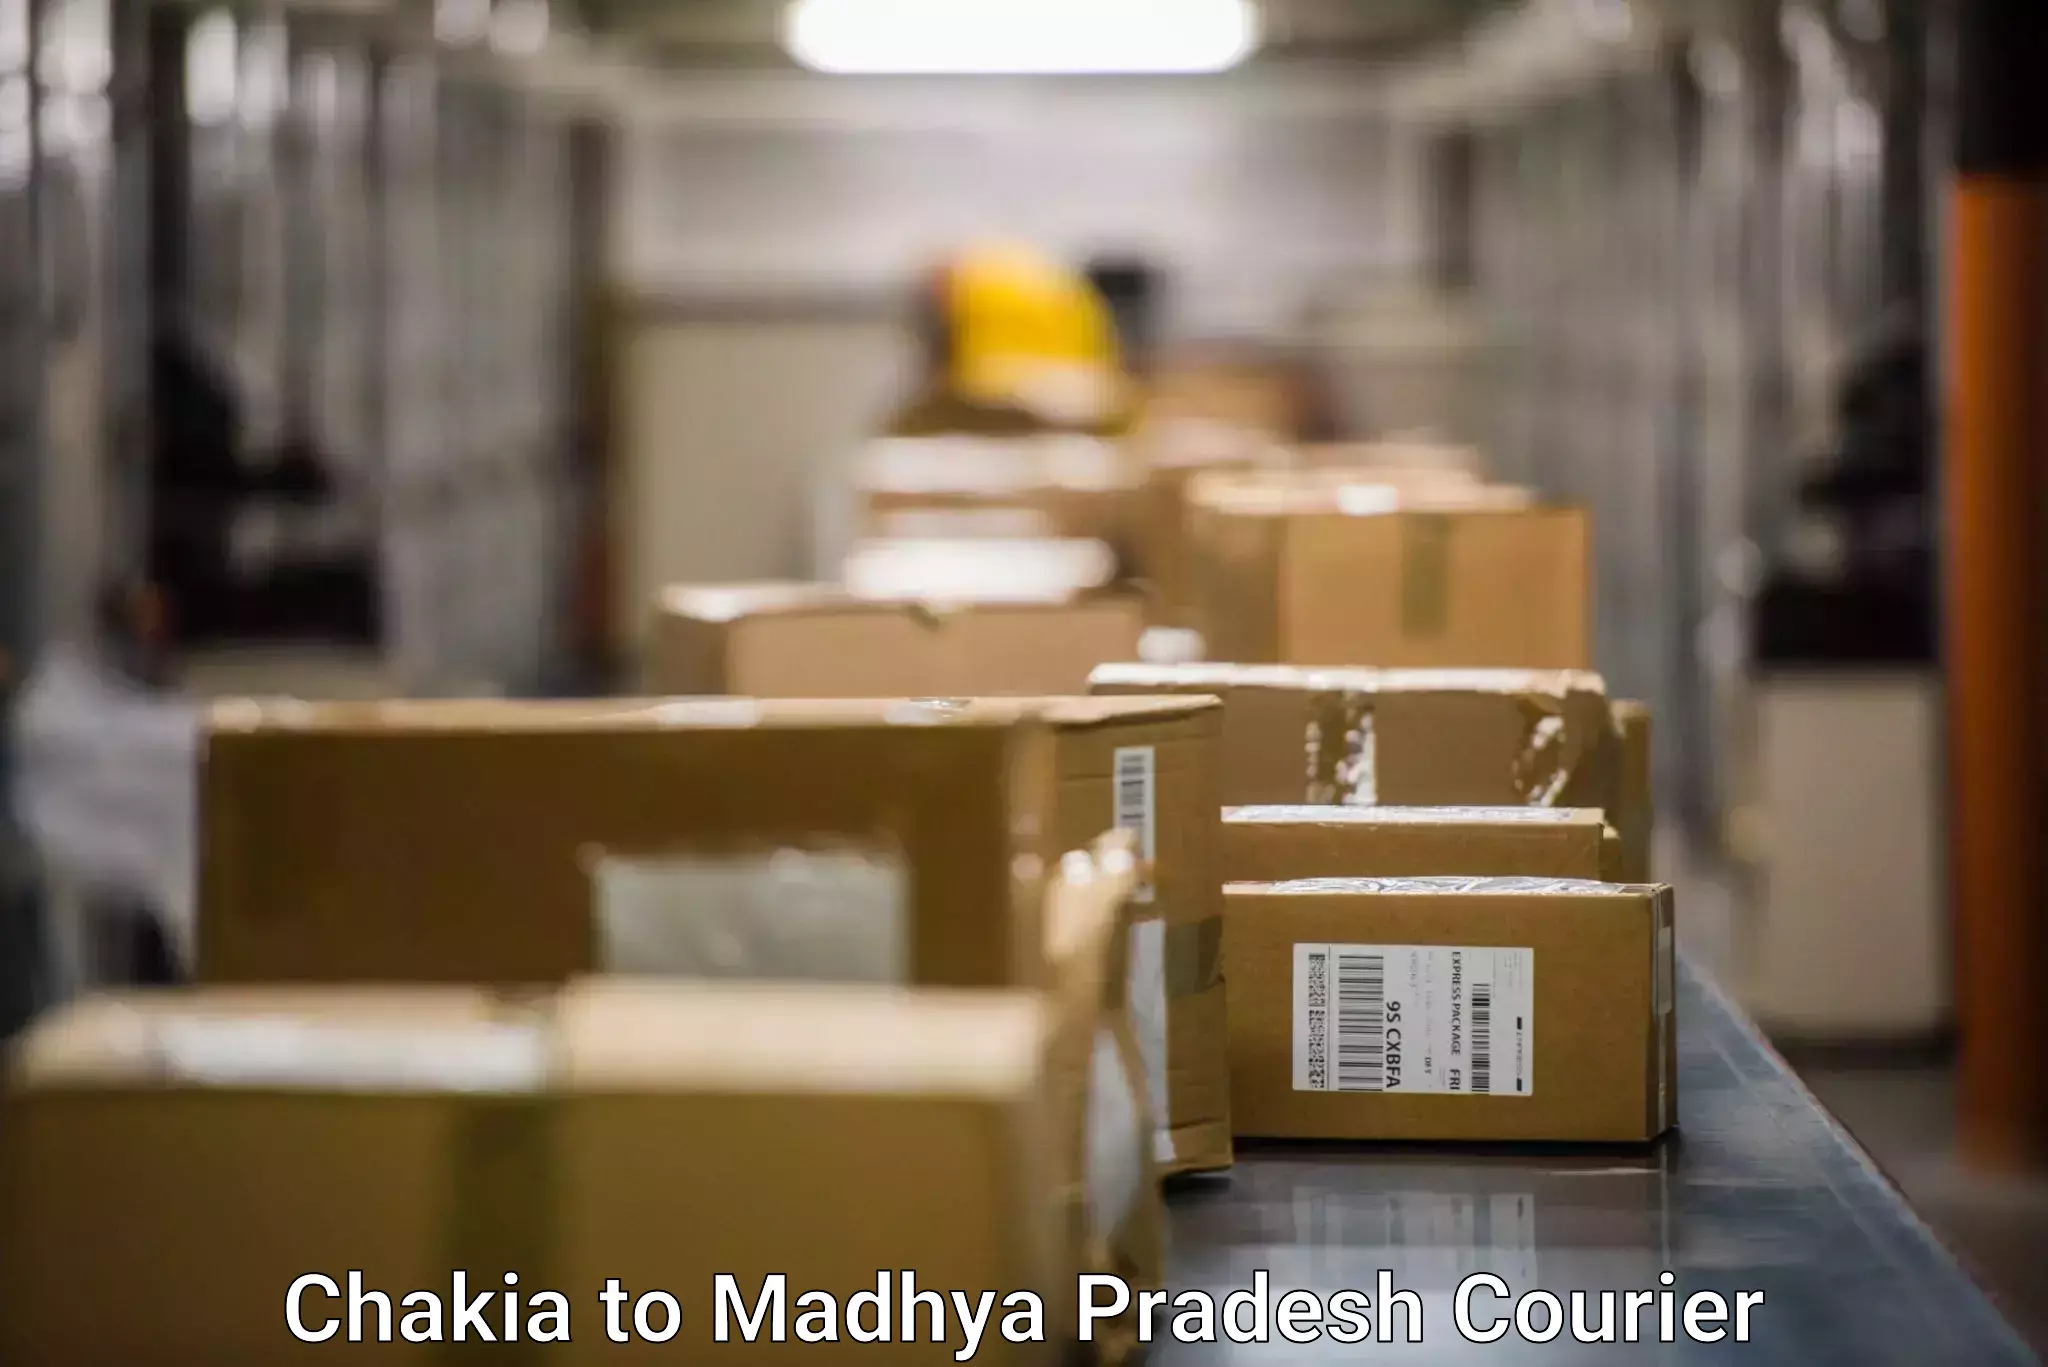 Global courier networks Chakia to Ujjain